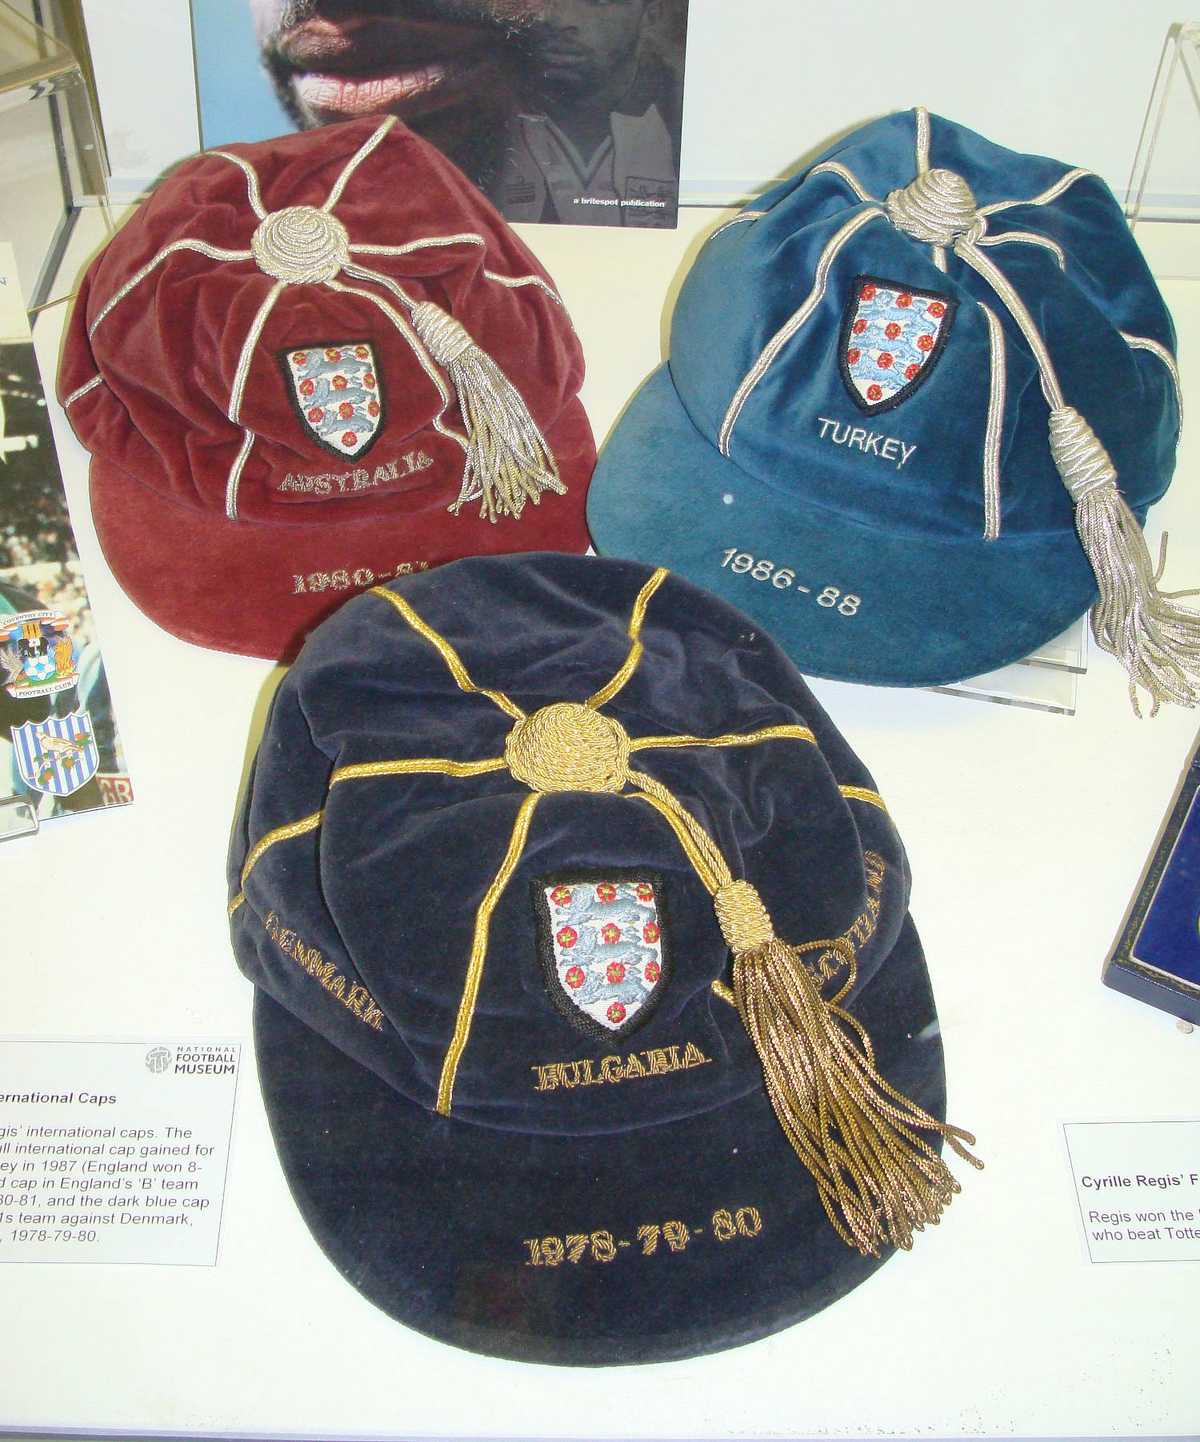 International caps awarded to Cyrille
Regis